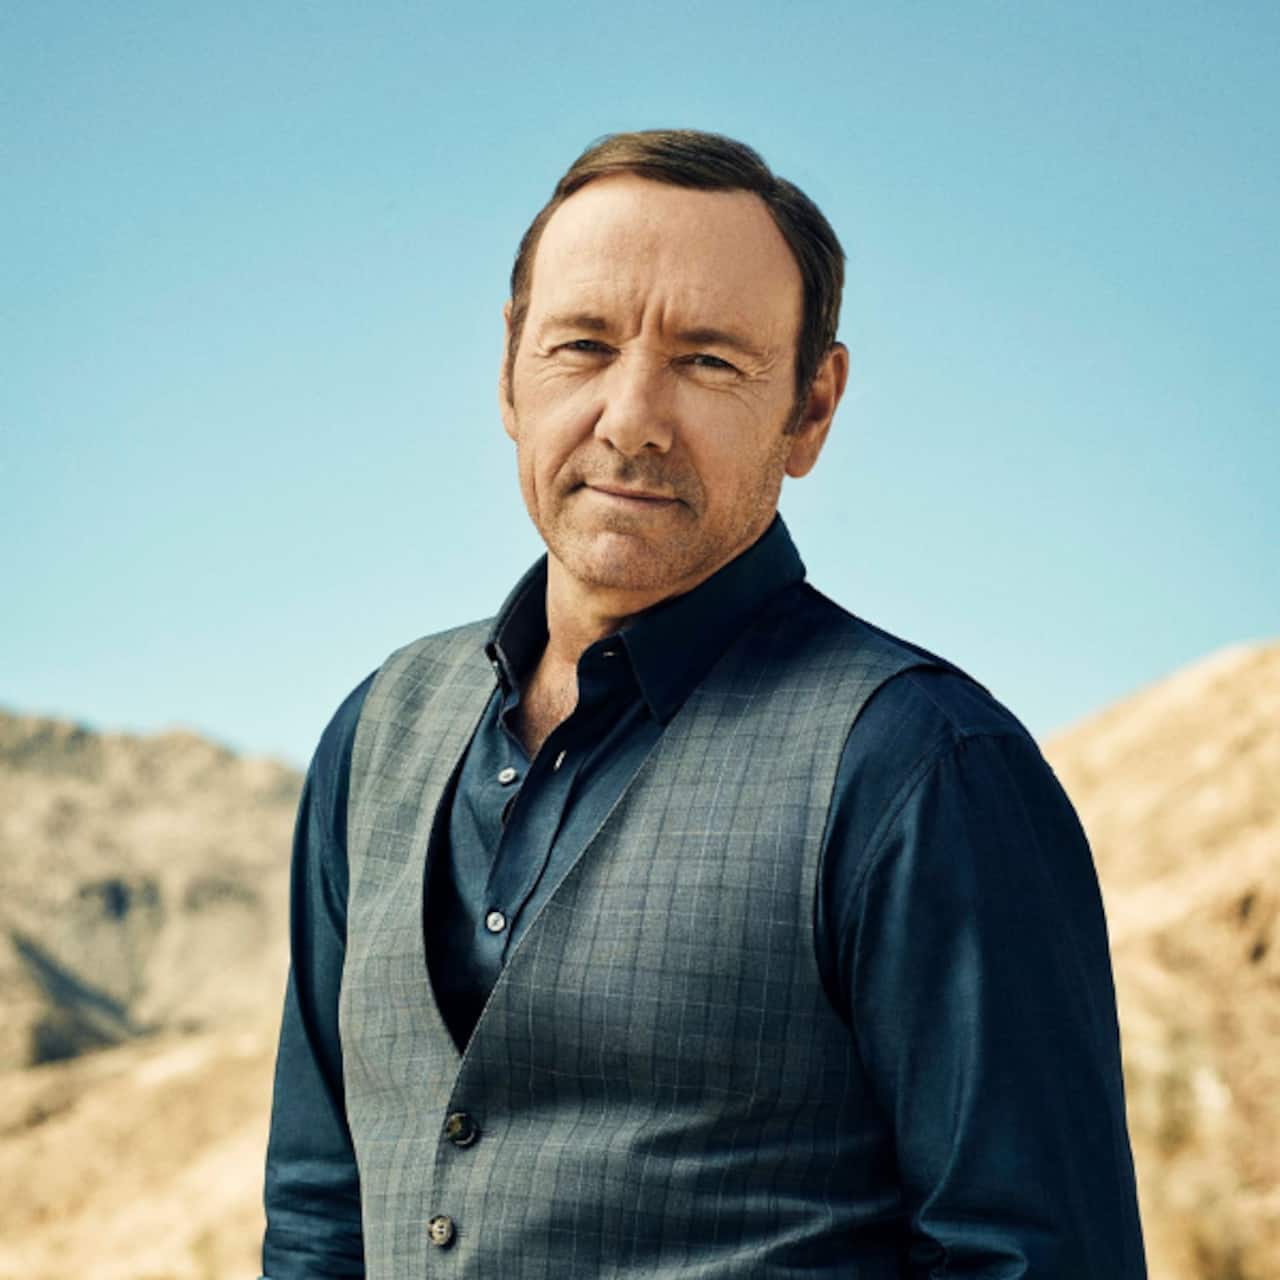 House of Cards actor Kevin Spacey lands first film after winning sexual battery lawsuit [check details] 